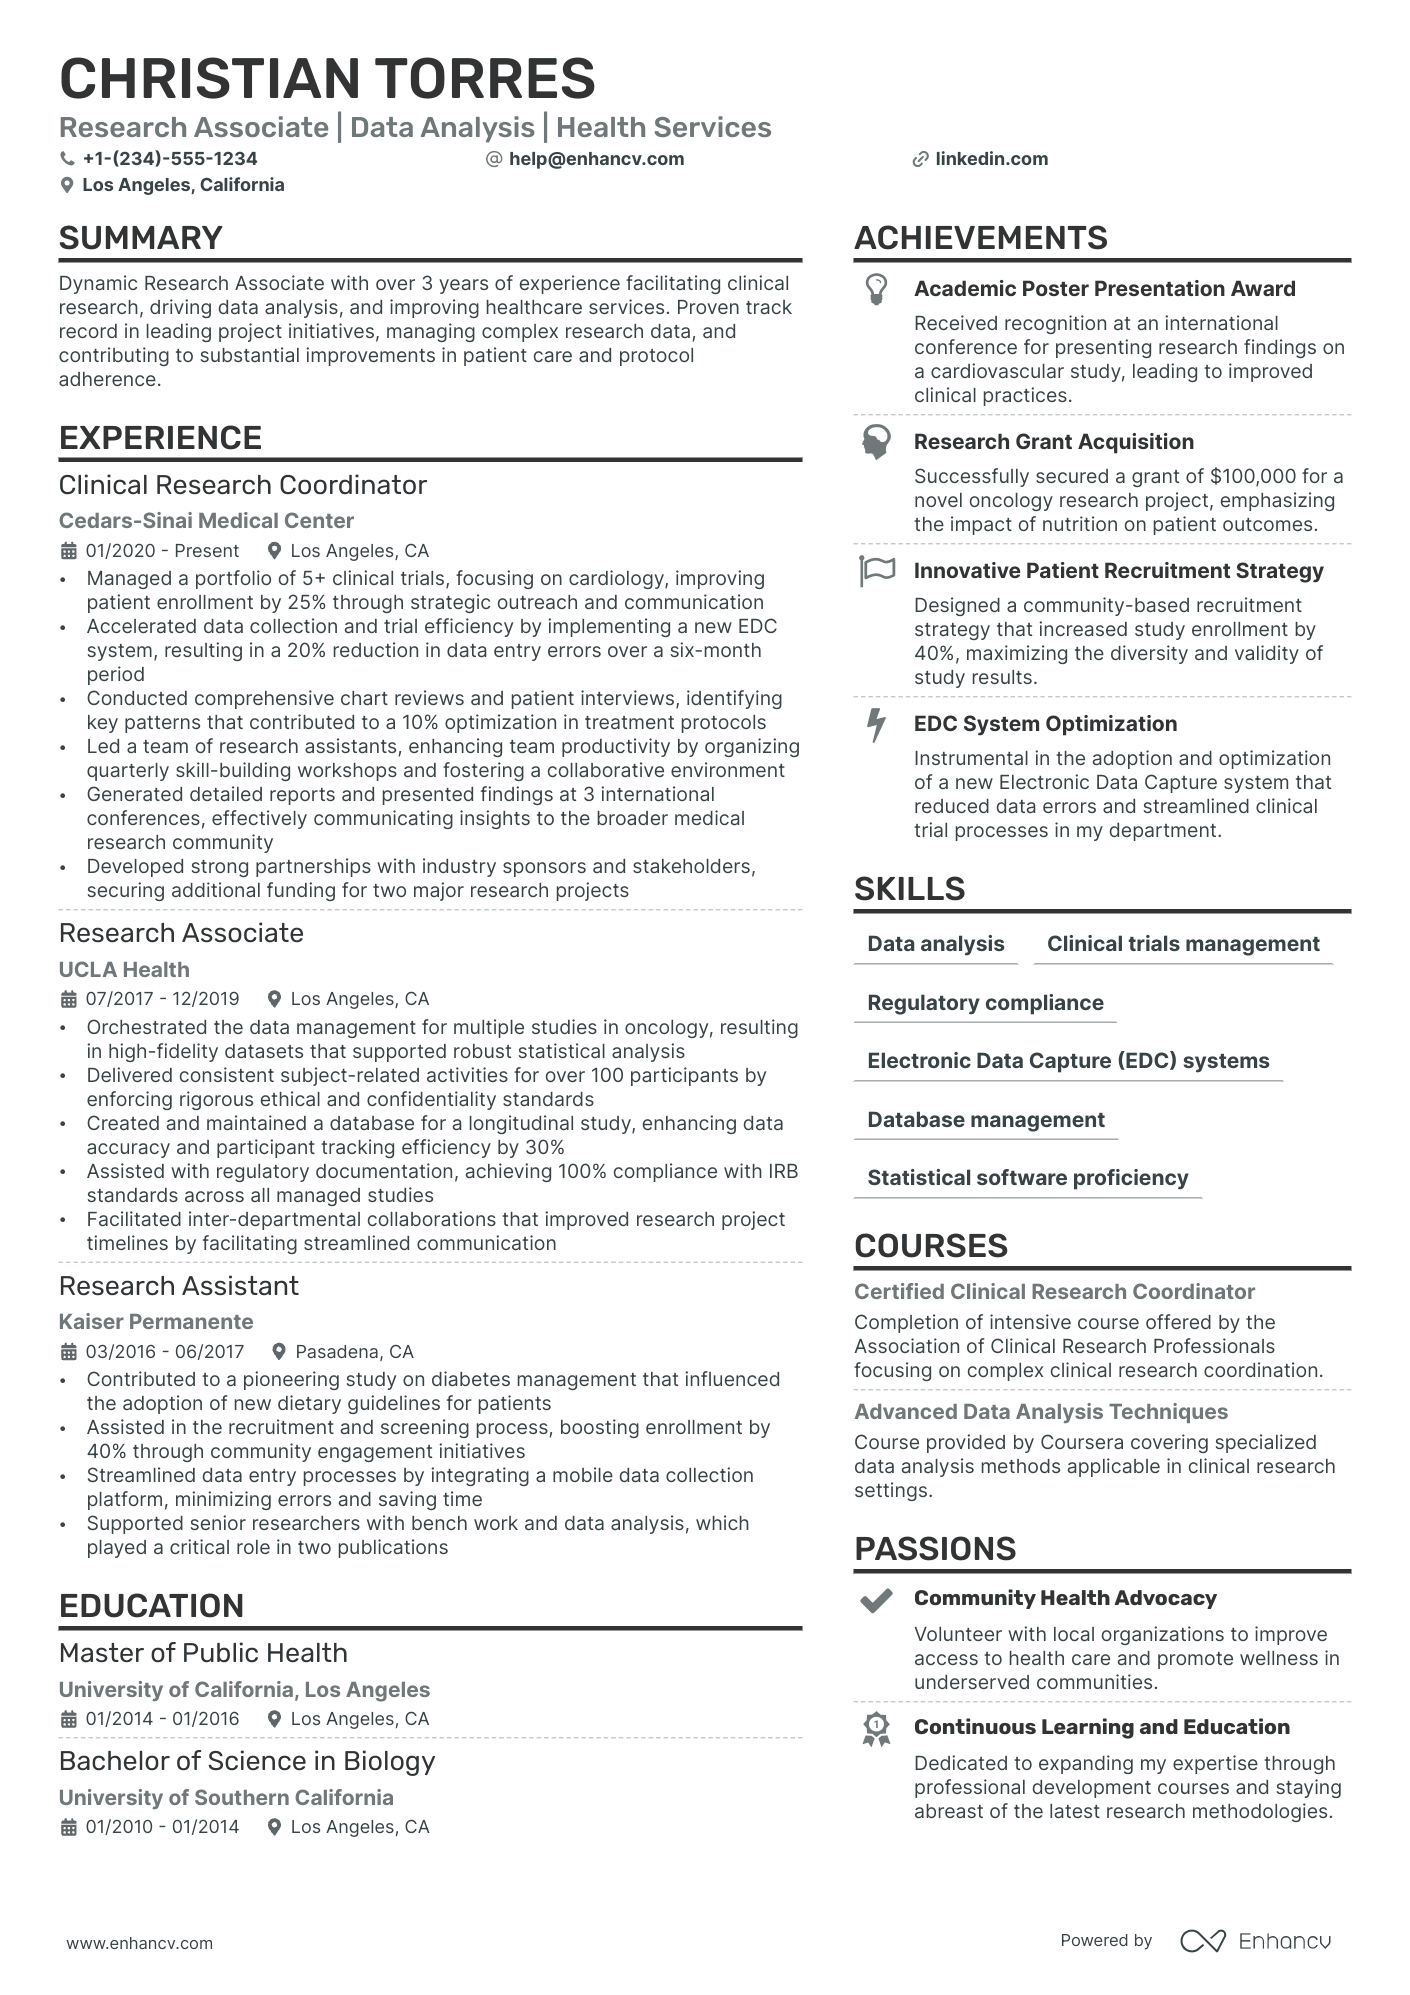 Research Associate resume example